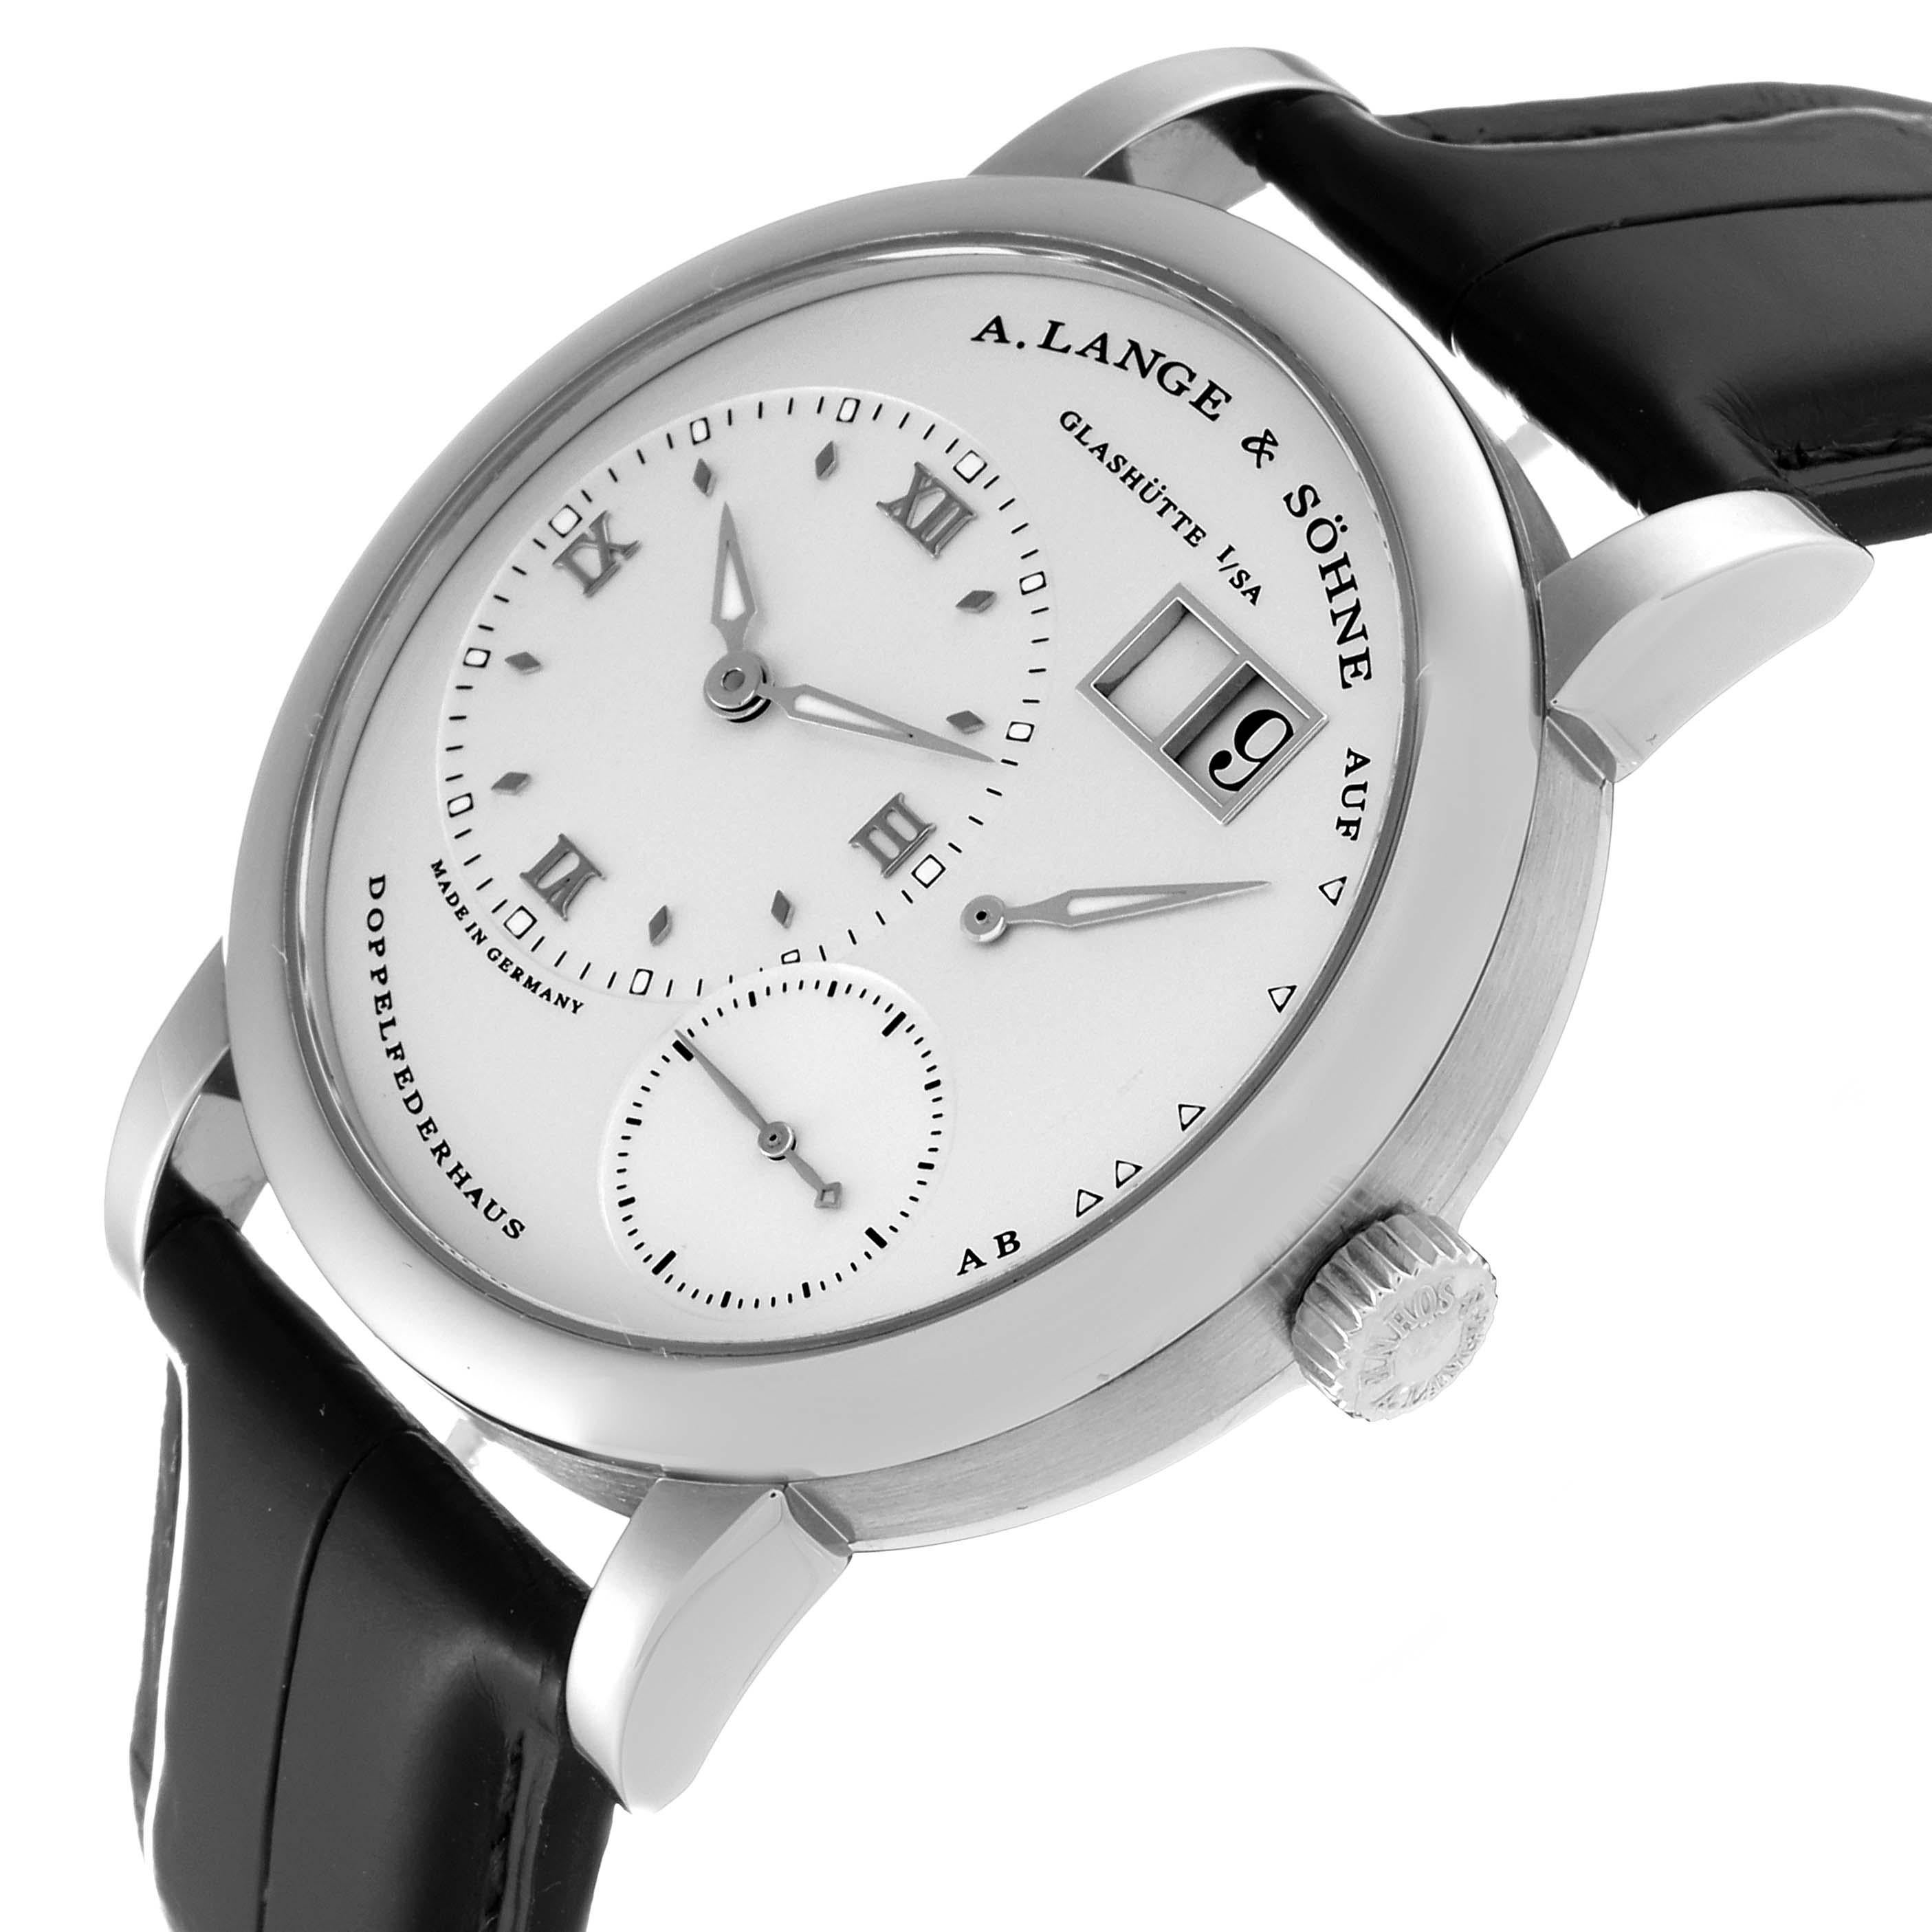 A. Lange and Sohne Lange 1 White Gold Silver Dial Mens Watch 101.039. Manual-winding movement. 18K white gold case 38.5 mm in diameter. Transparent exhibition sapphire crystal case back. Quick date-correction button located on the case edge at the